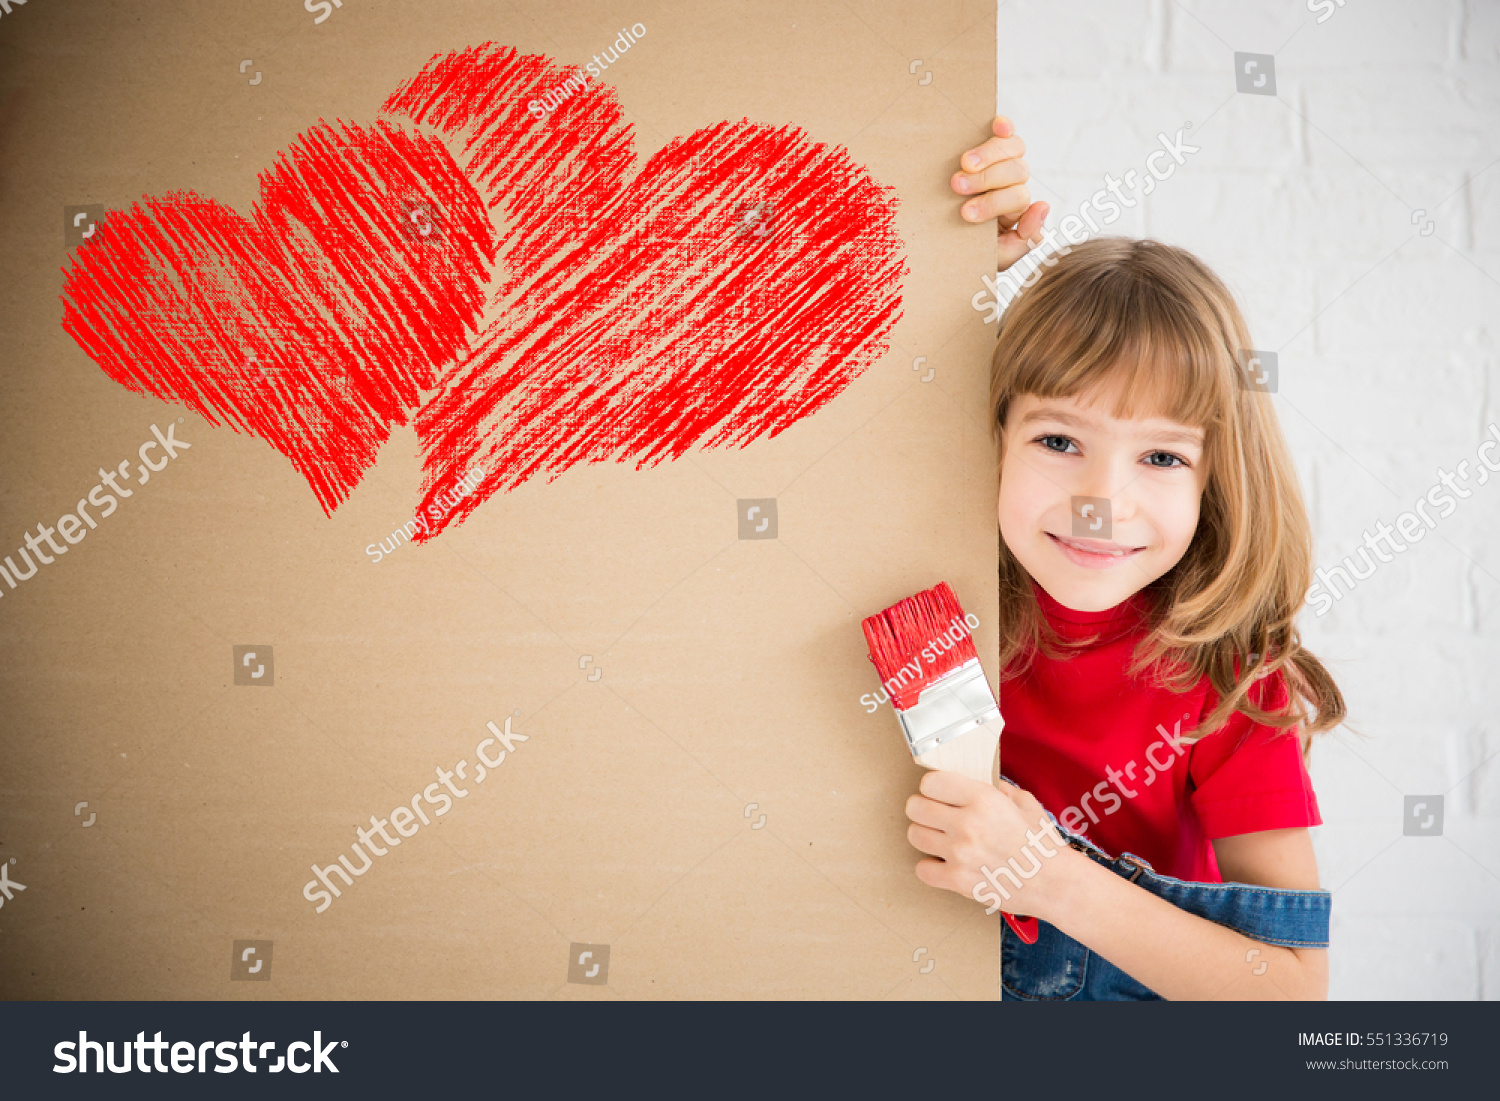 Happy child painting big red heart on the wall. Funny girl playing at home. Valentines day card. Renovation and design concept #551336719